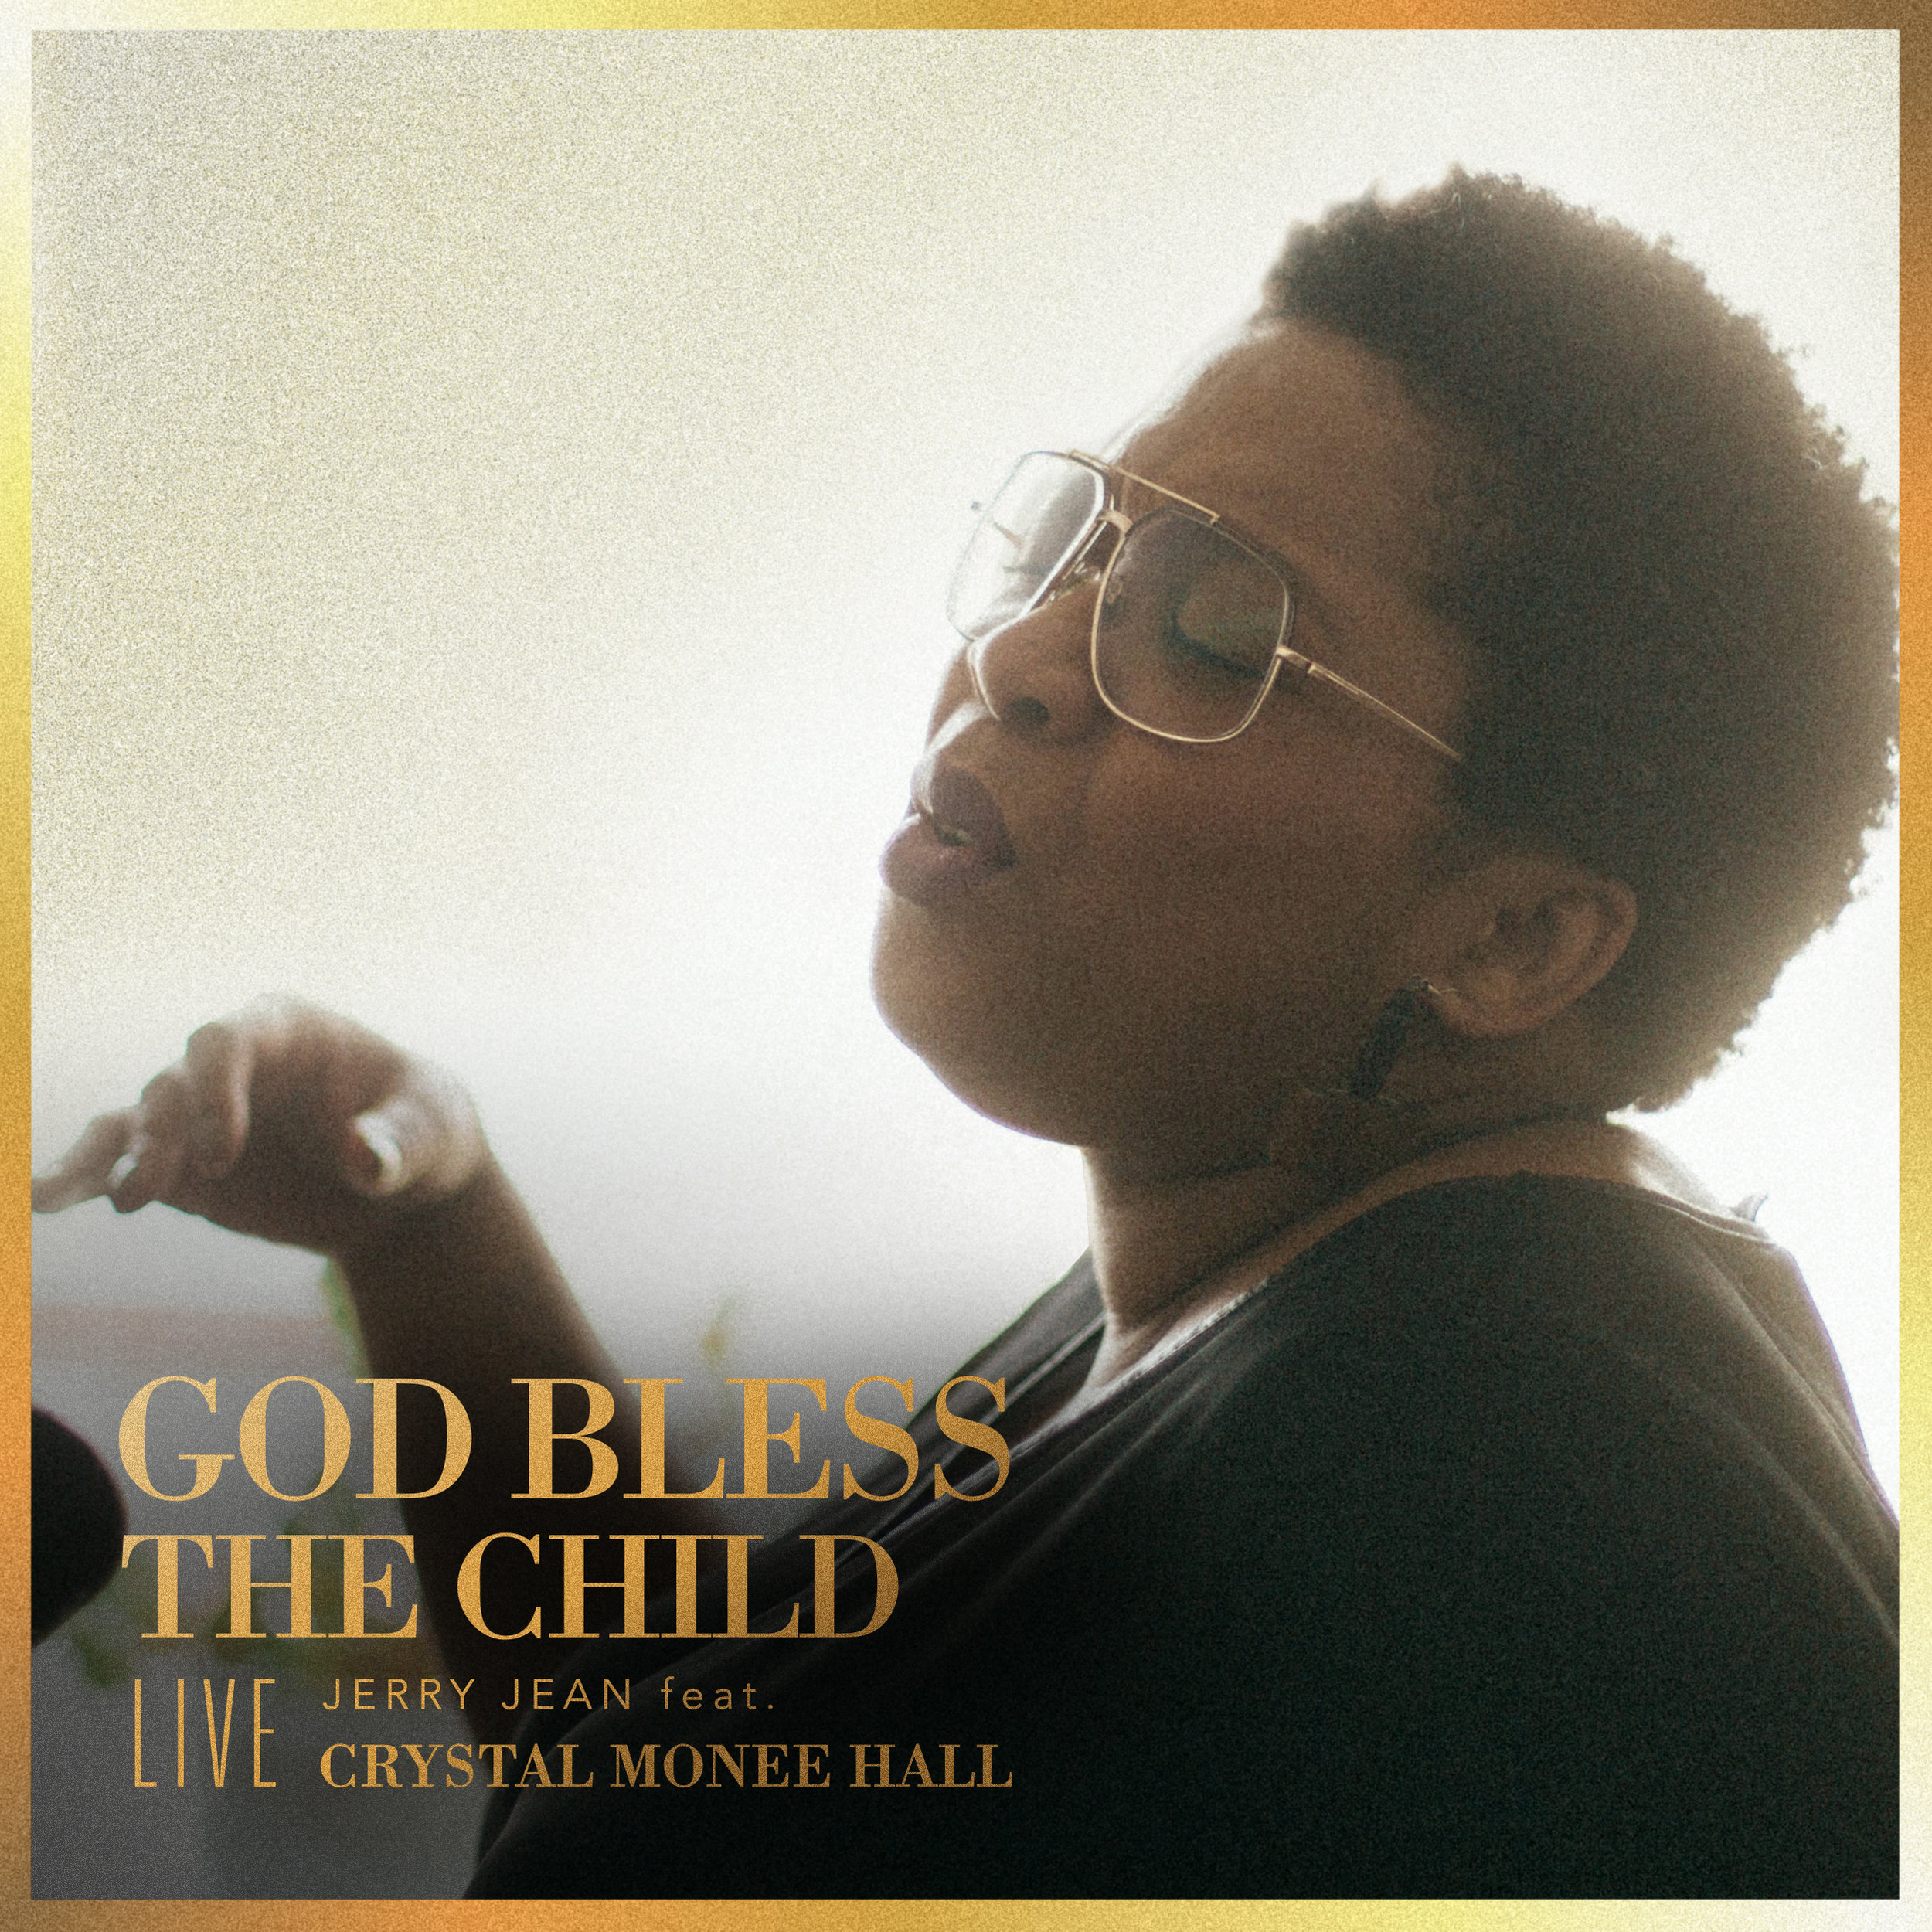 God Bless the Child (Live) [Jerry Jean feat. Crystal Monee Hall]